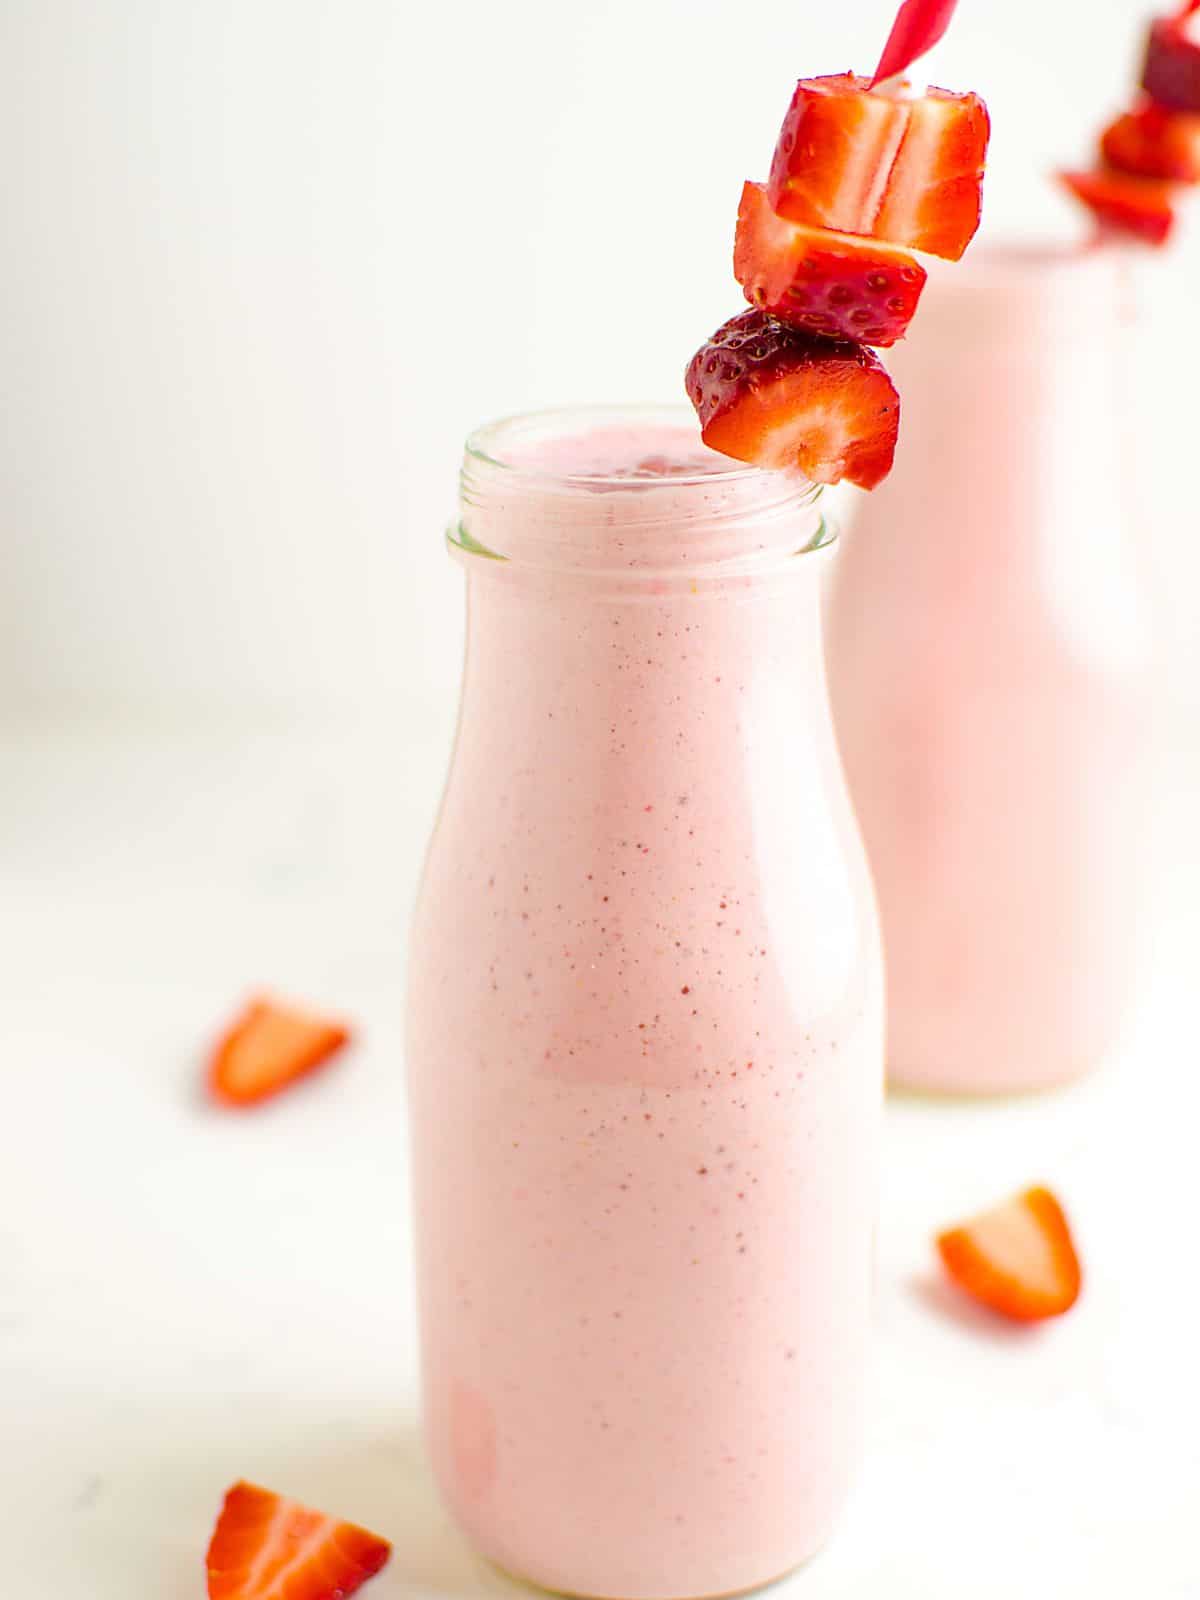 2 milk bottle glasses filled with a strawberry smoothie, garnished with fresh strawberries on the straw. 